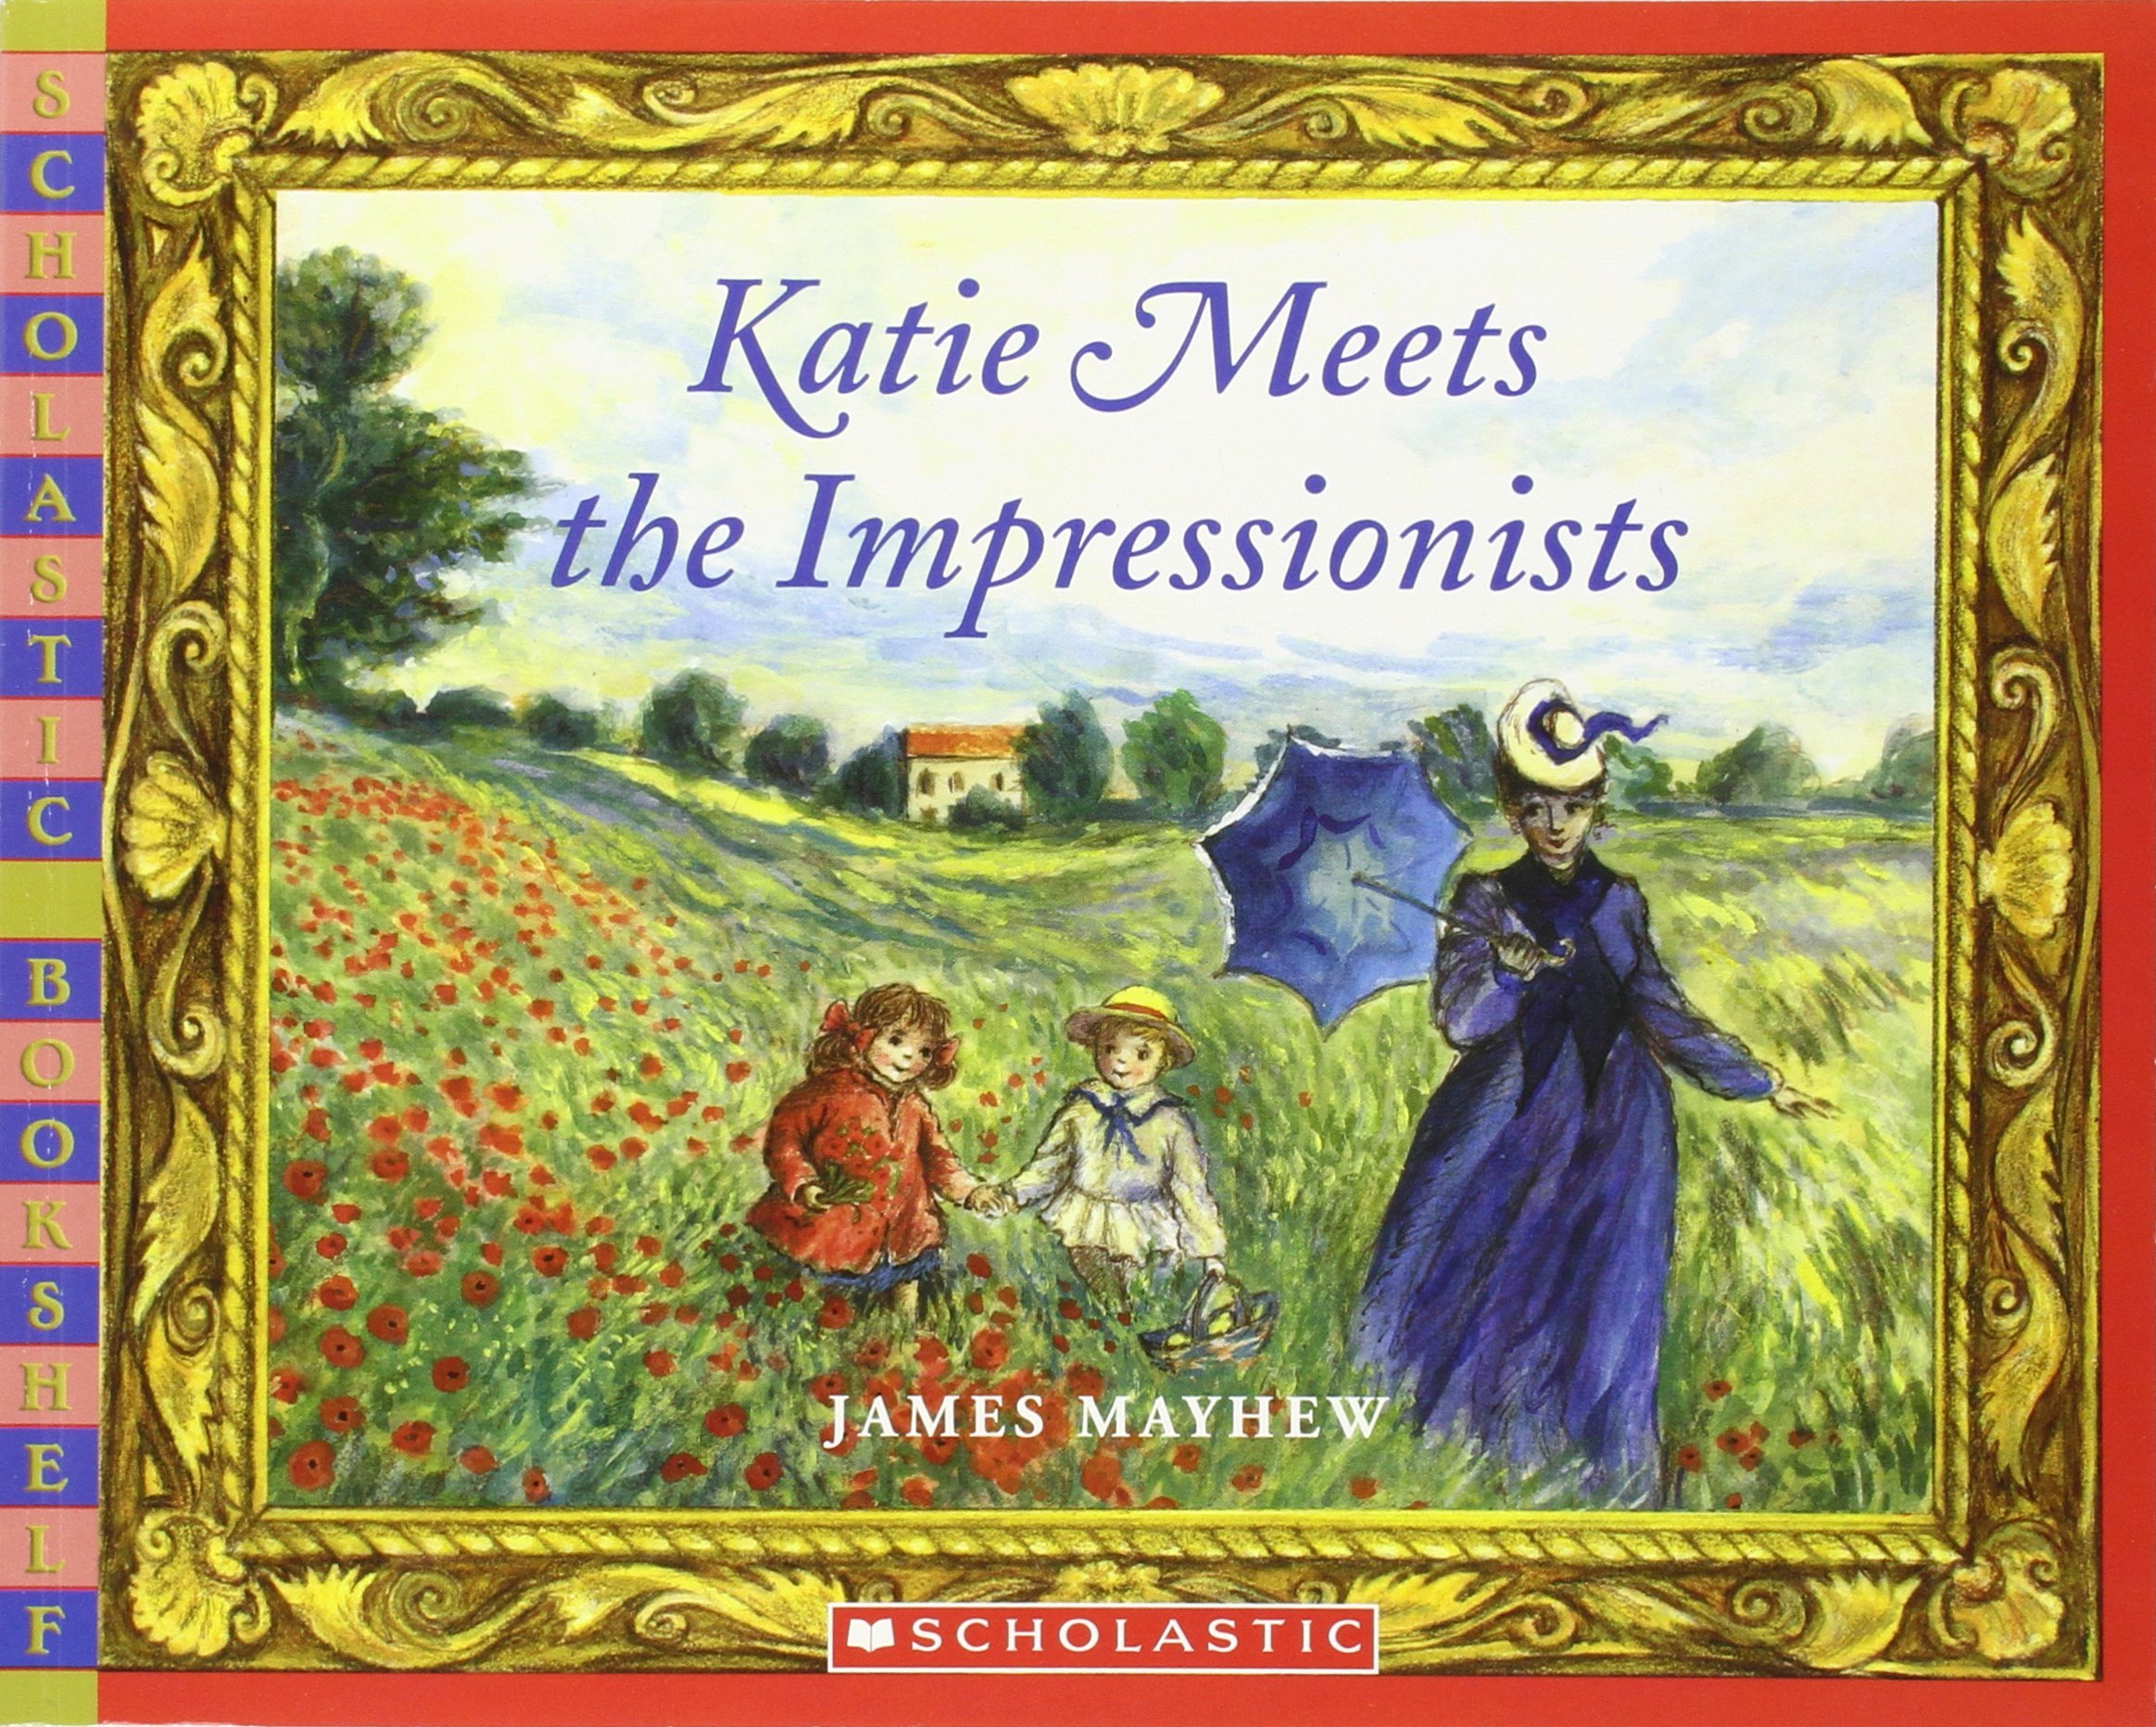 Picture book about art